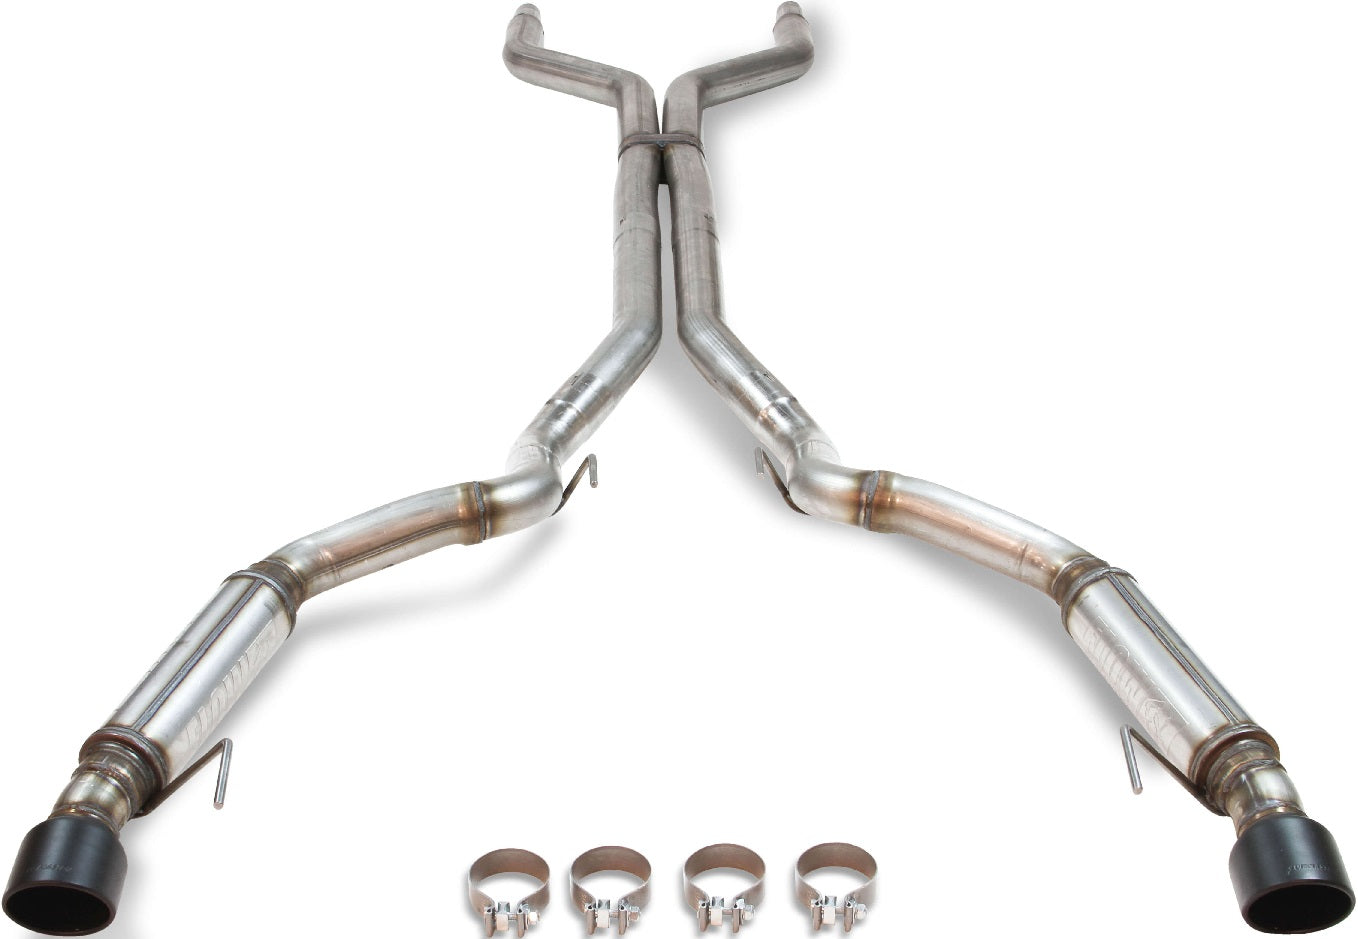 CAT-BACK EXHAUST,15-17 MUSTANG GT,5.0L,DUAL OUT REAR